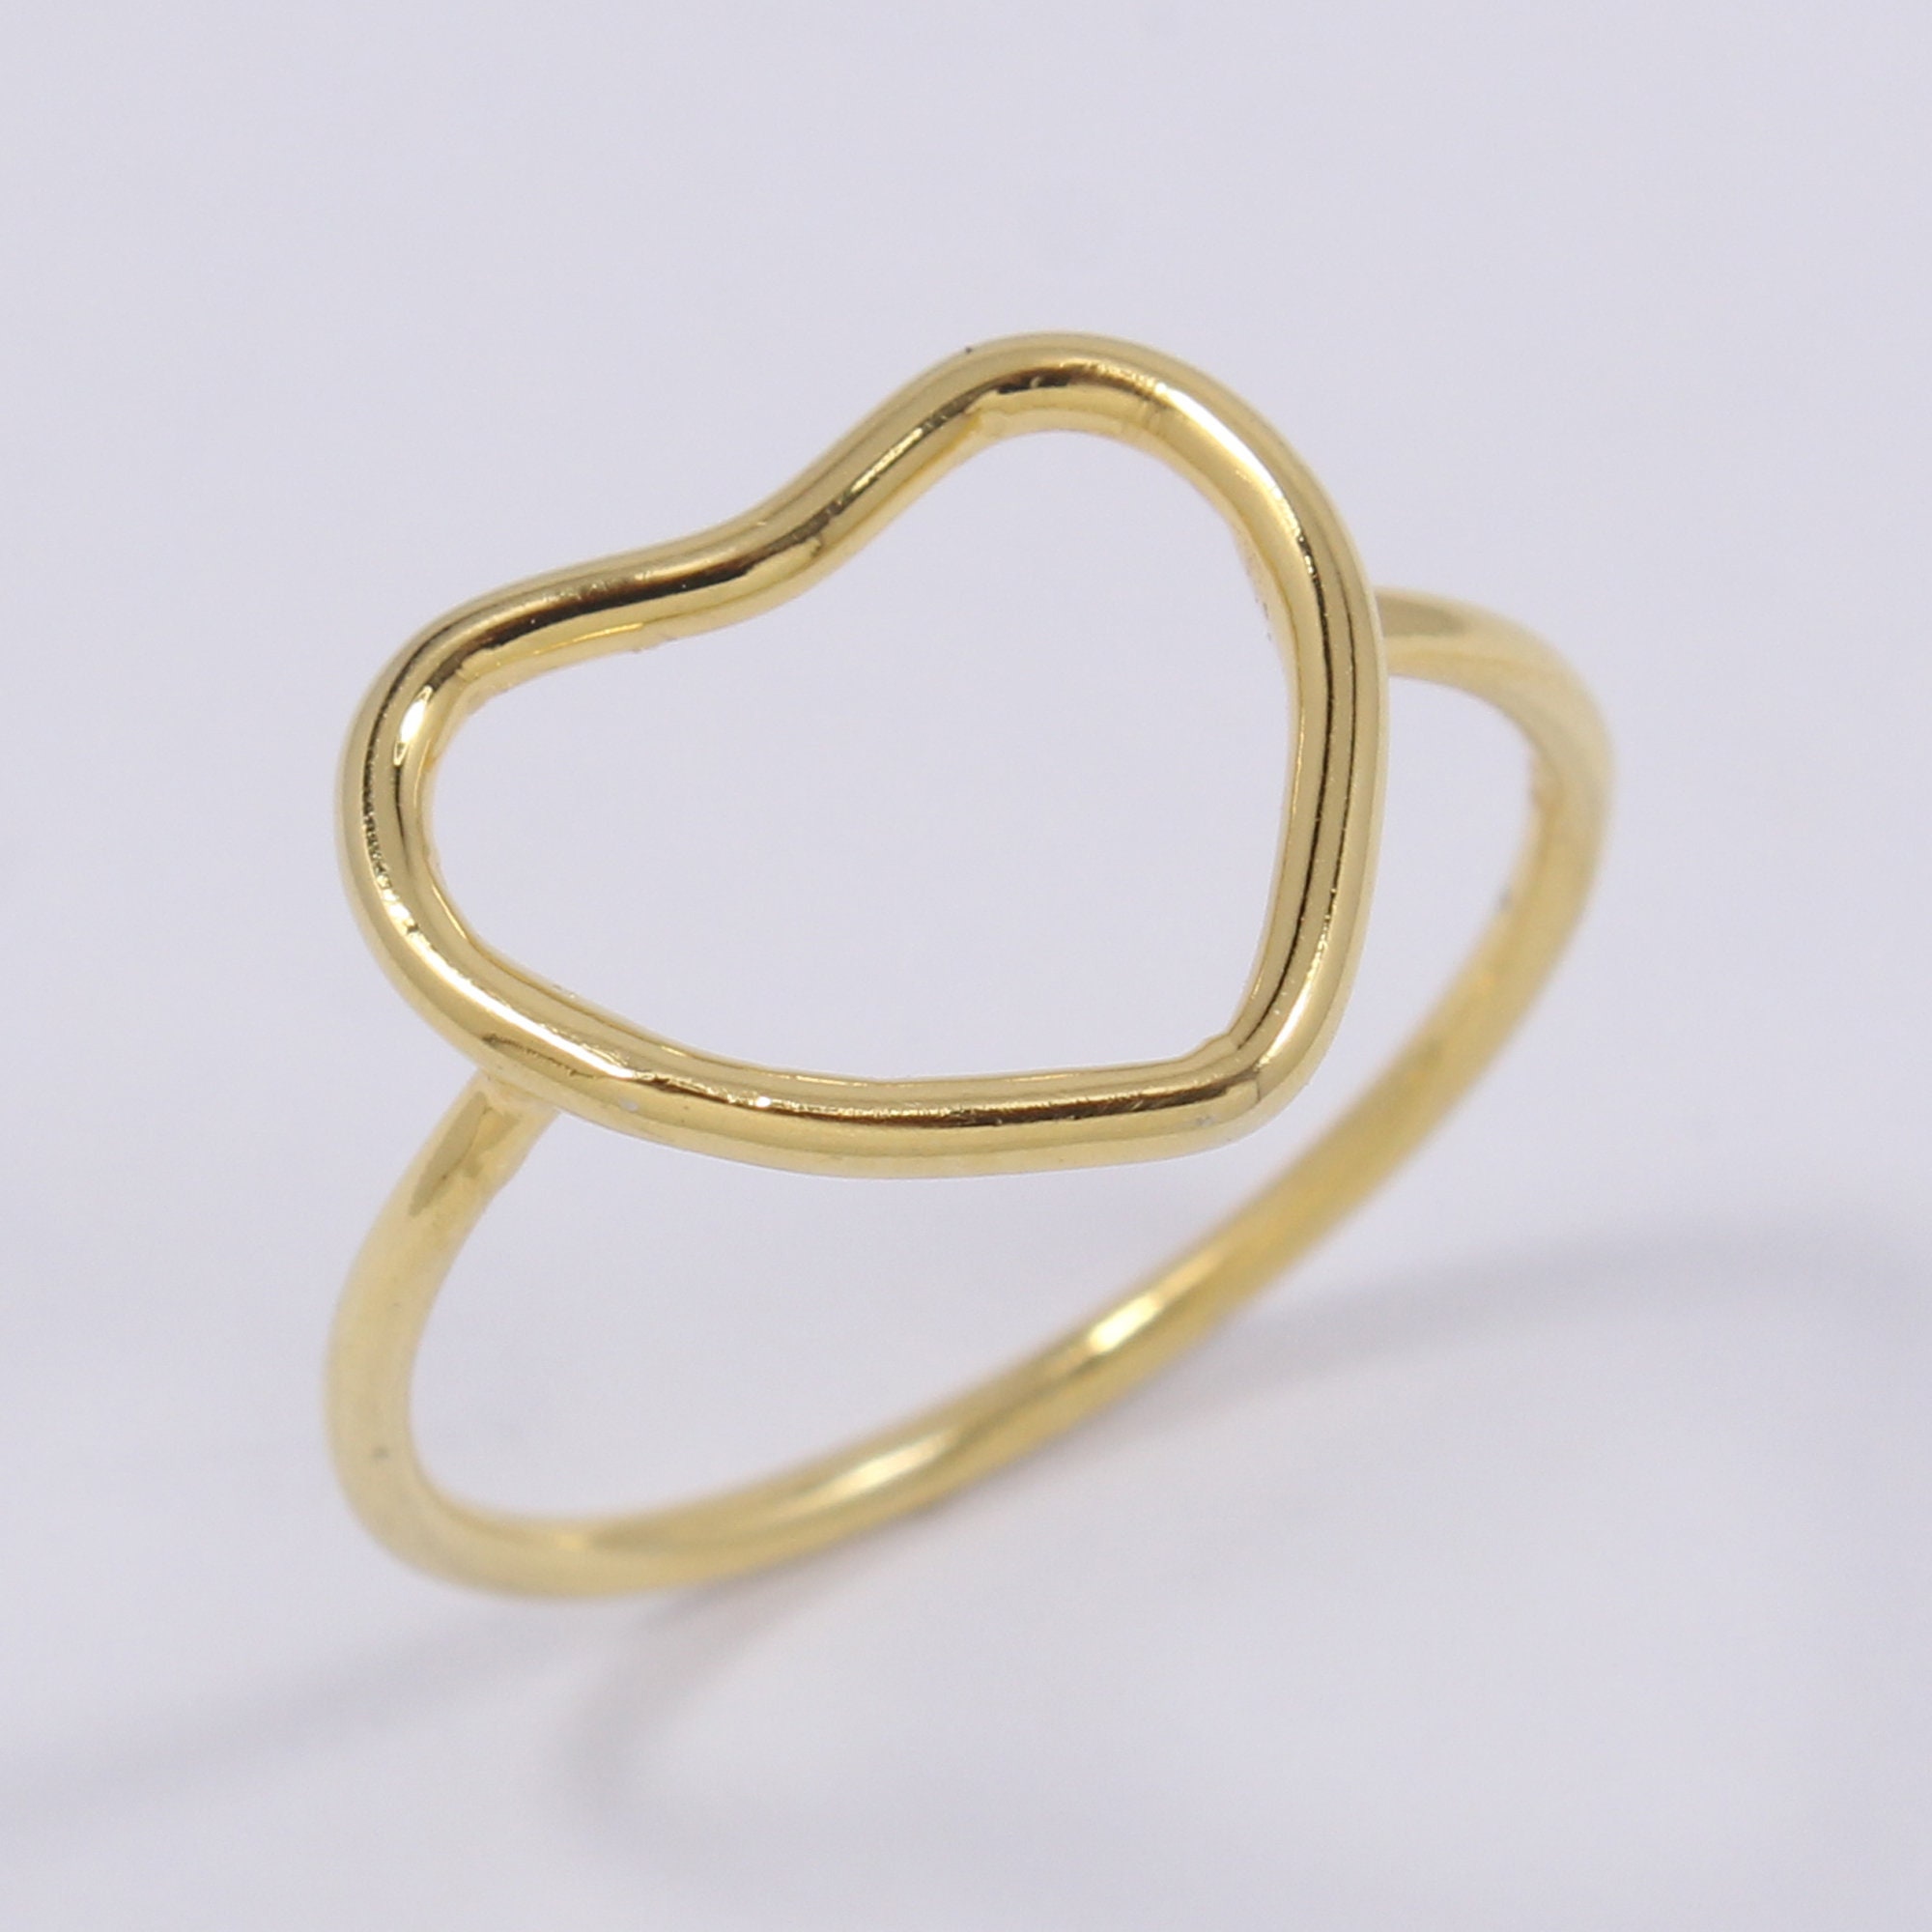 Bulk-buy Good Quality Real Gold Ring Women Simple 14K Solid Gold Ring  Designs Without Gemstone price comparison